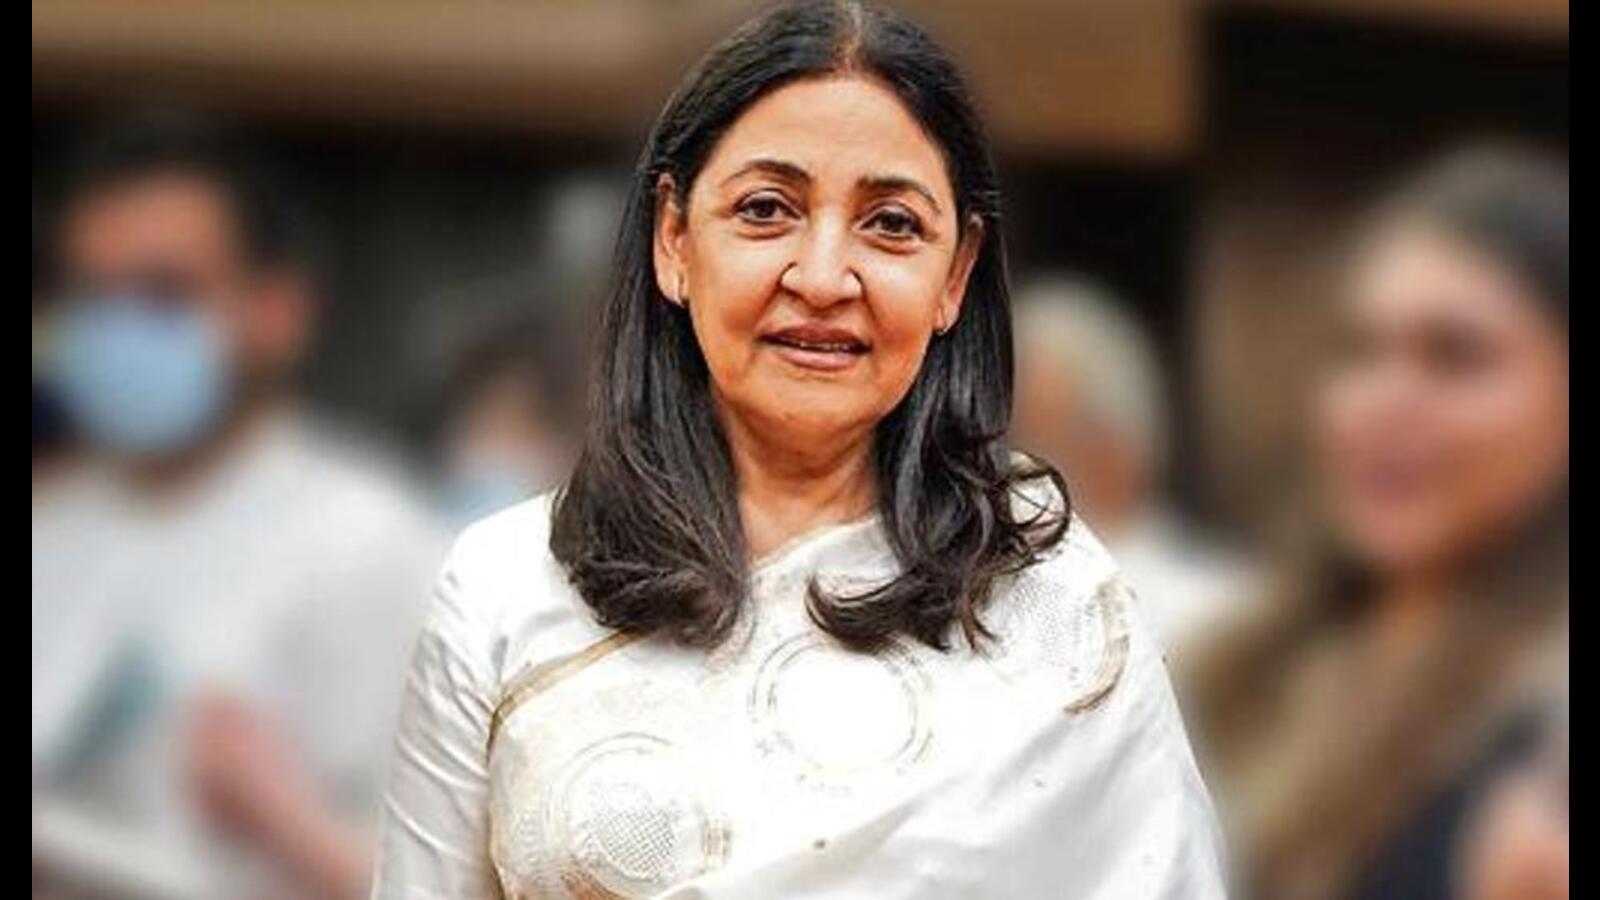 Deepti Naval: My self image is contrary to the sweet girl-next-door label